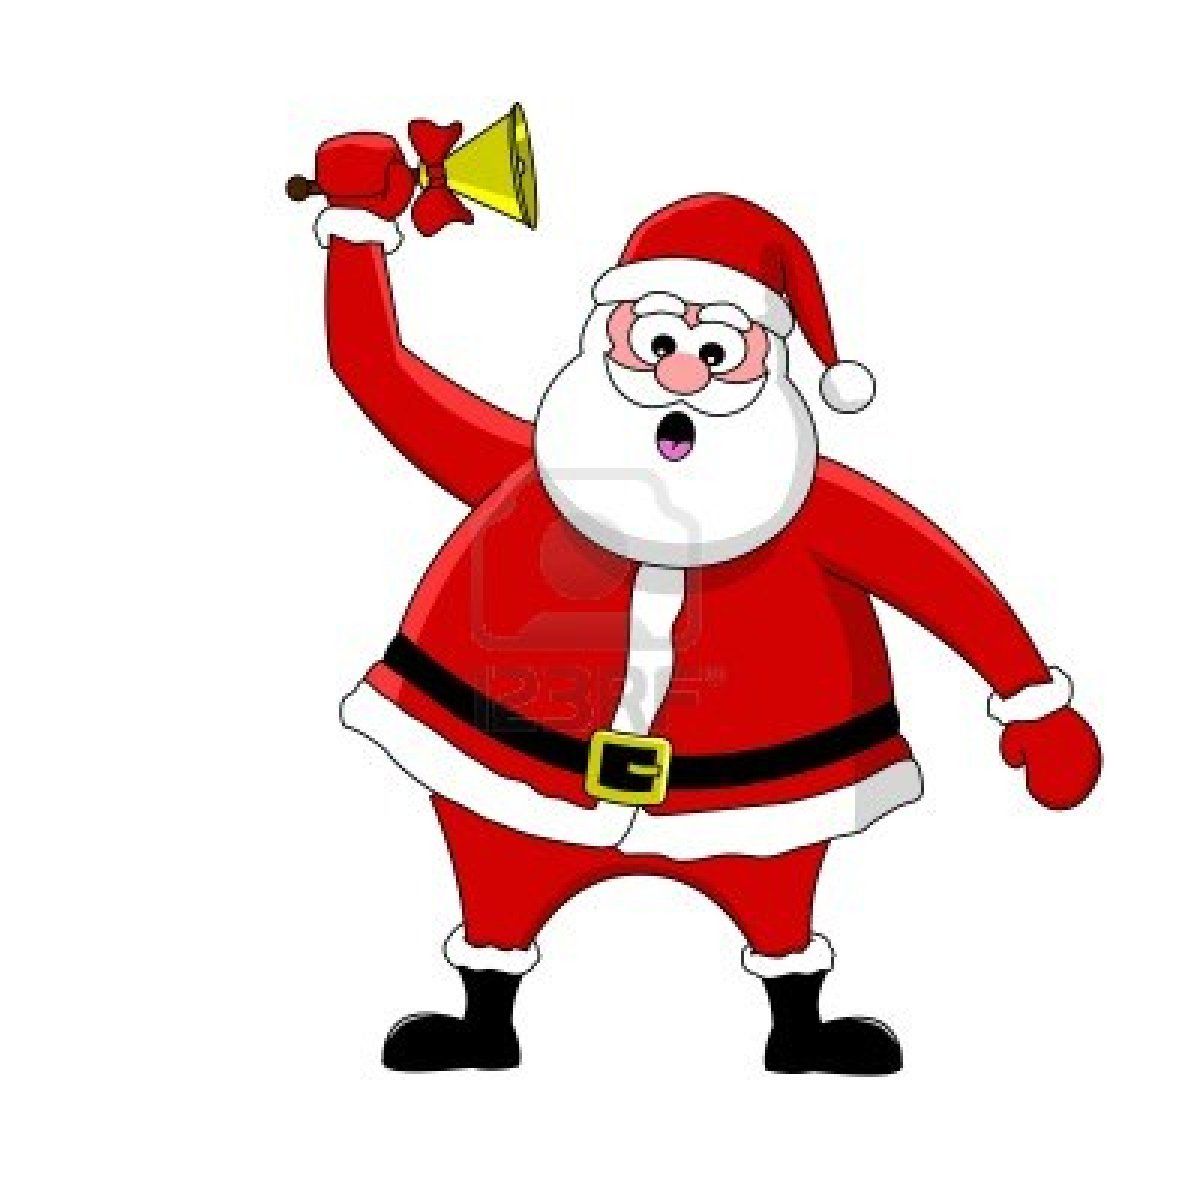 Santa clipart animated. Claus images merry christmas